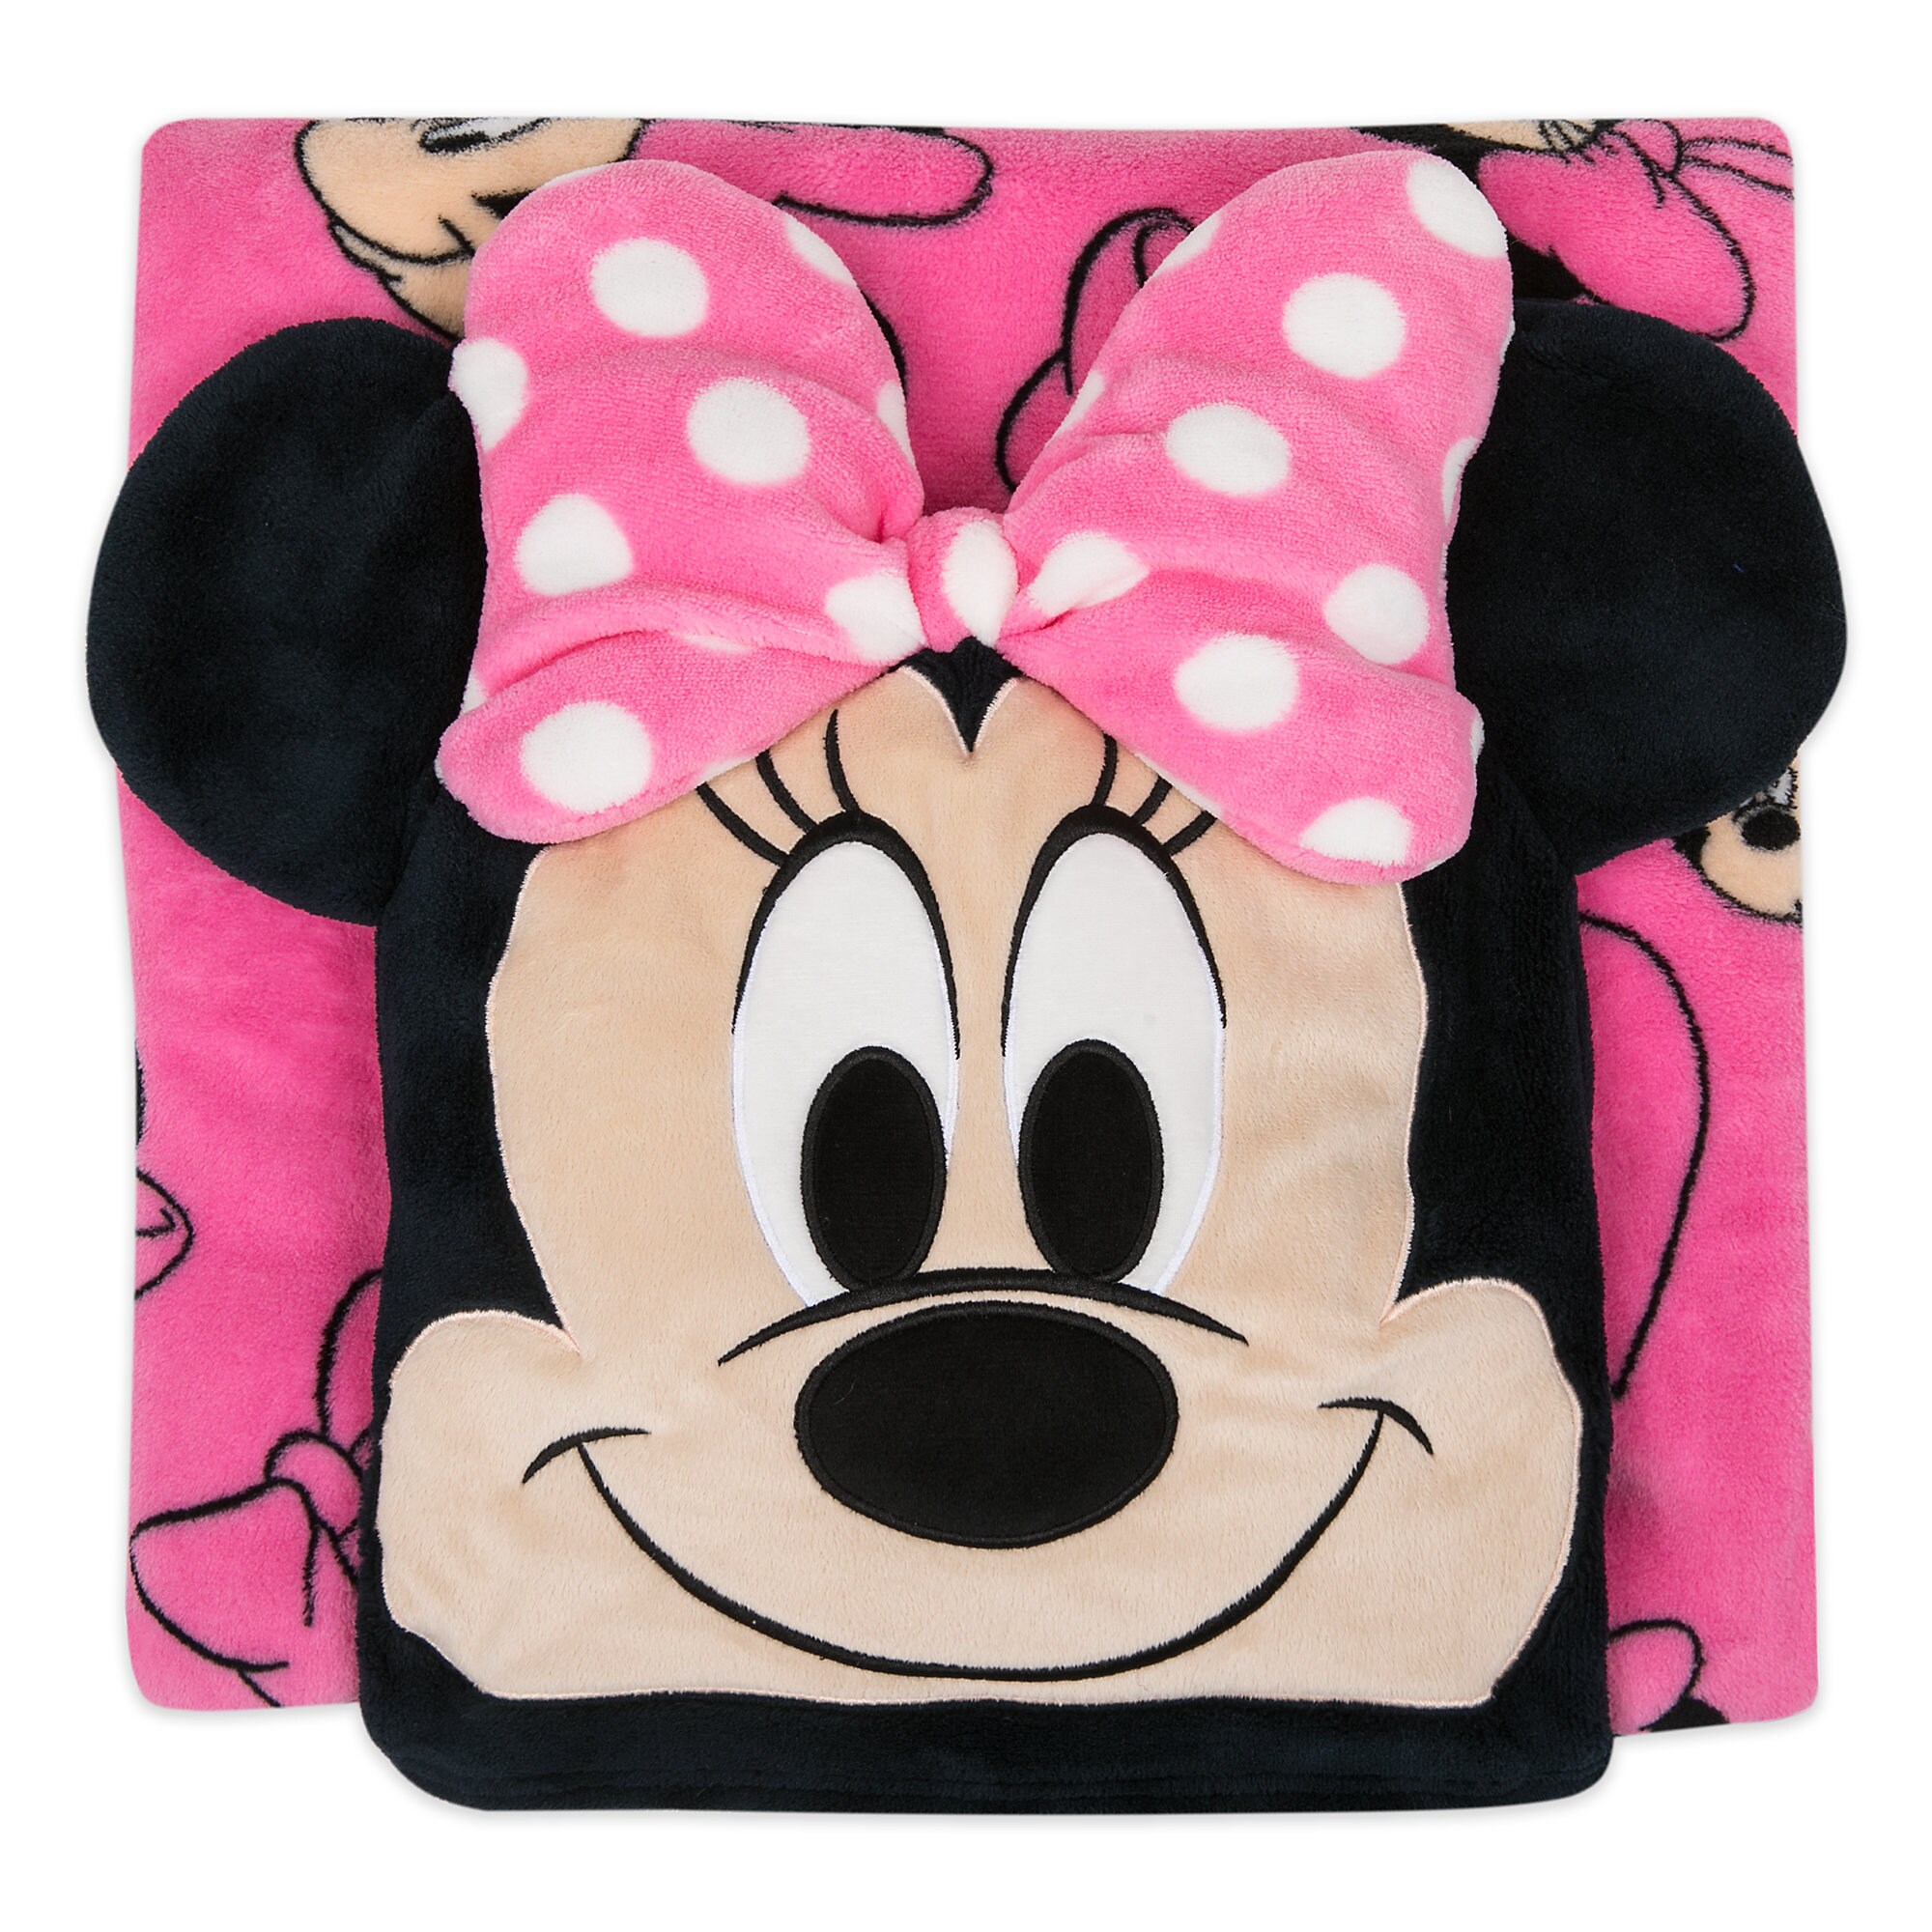 Minnie Mouse Convertible Fleece Throw - Personalized